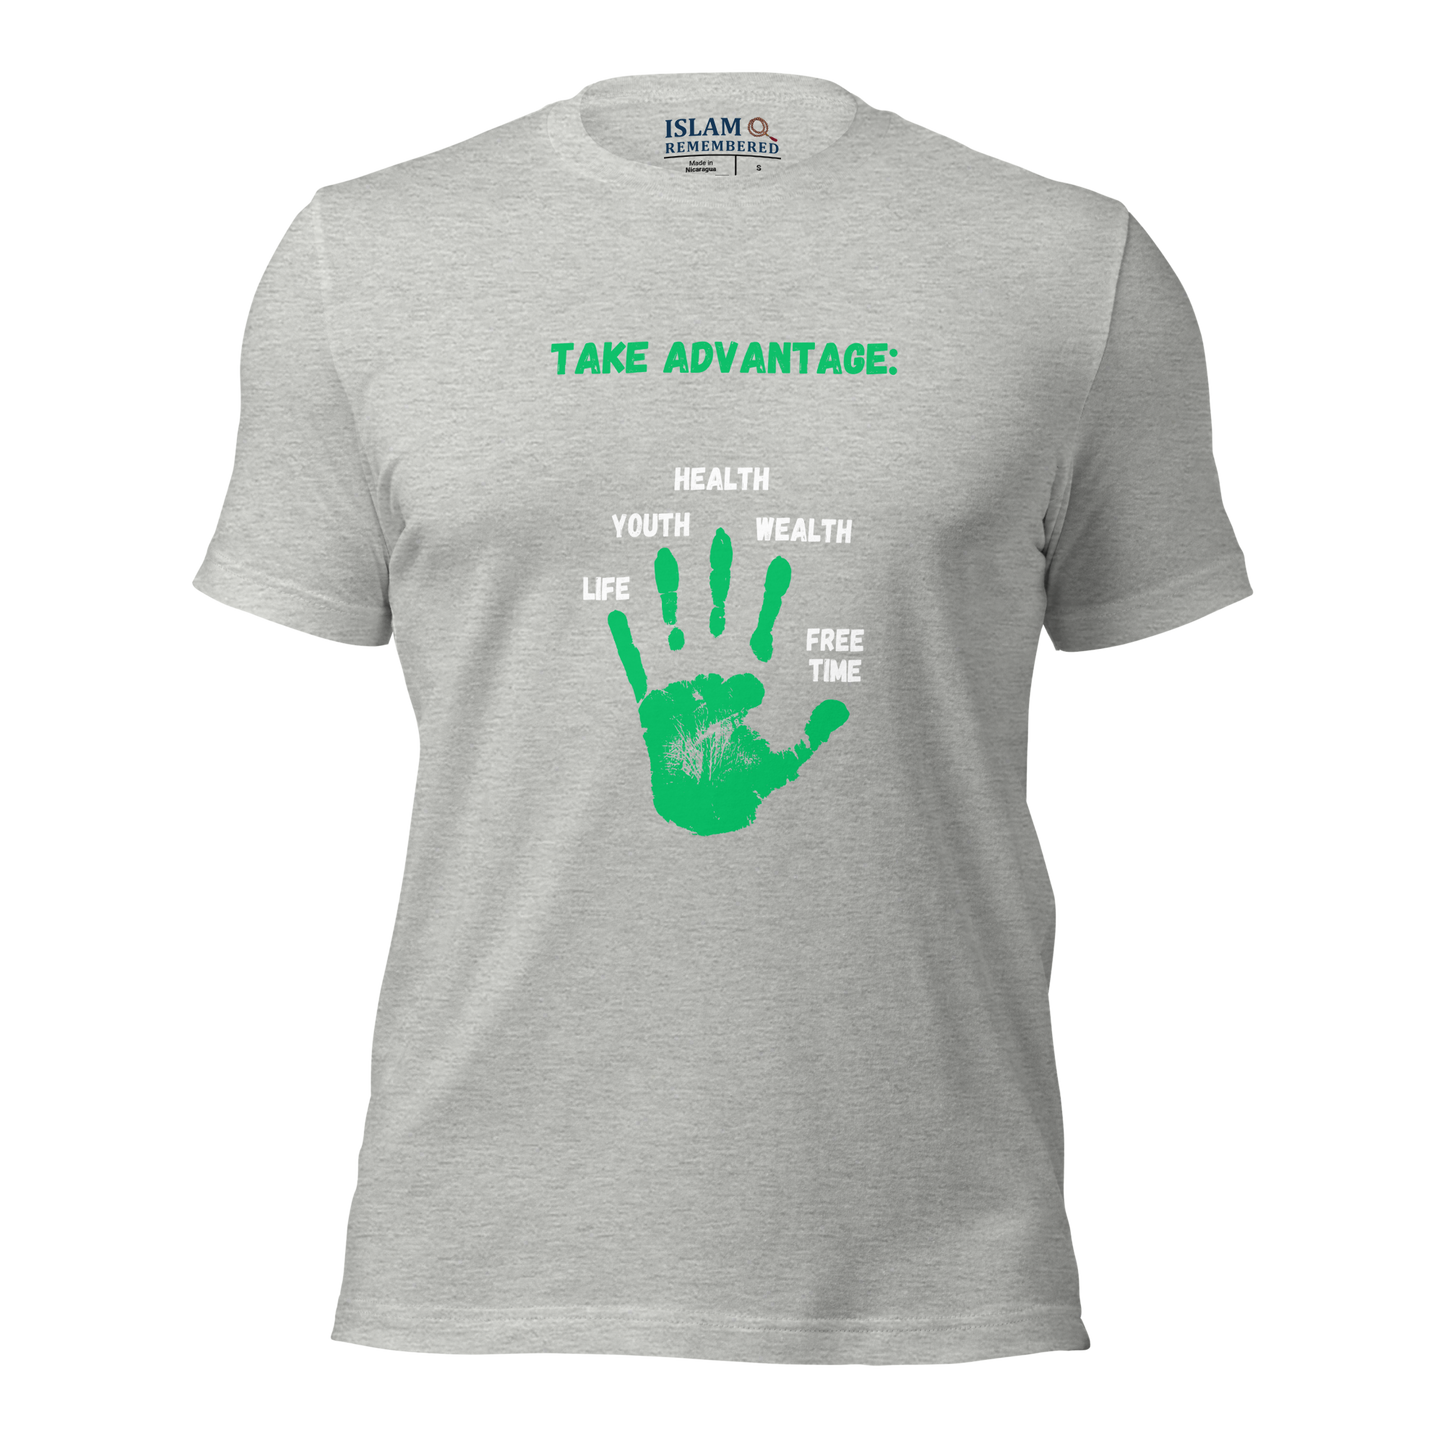 ADULT T-Shirt - ADVANTAGE BEFORE (Front/Back) - Green/White